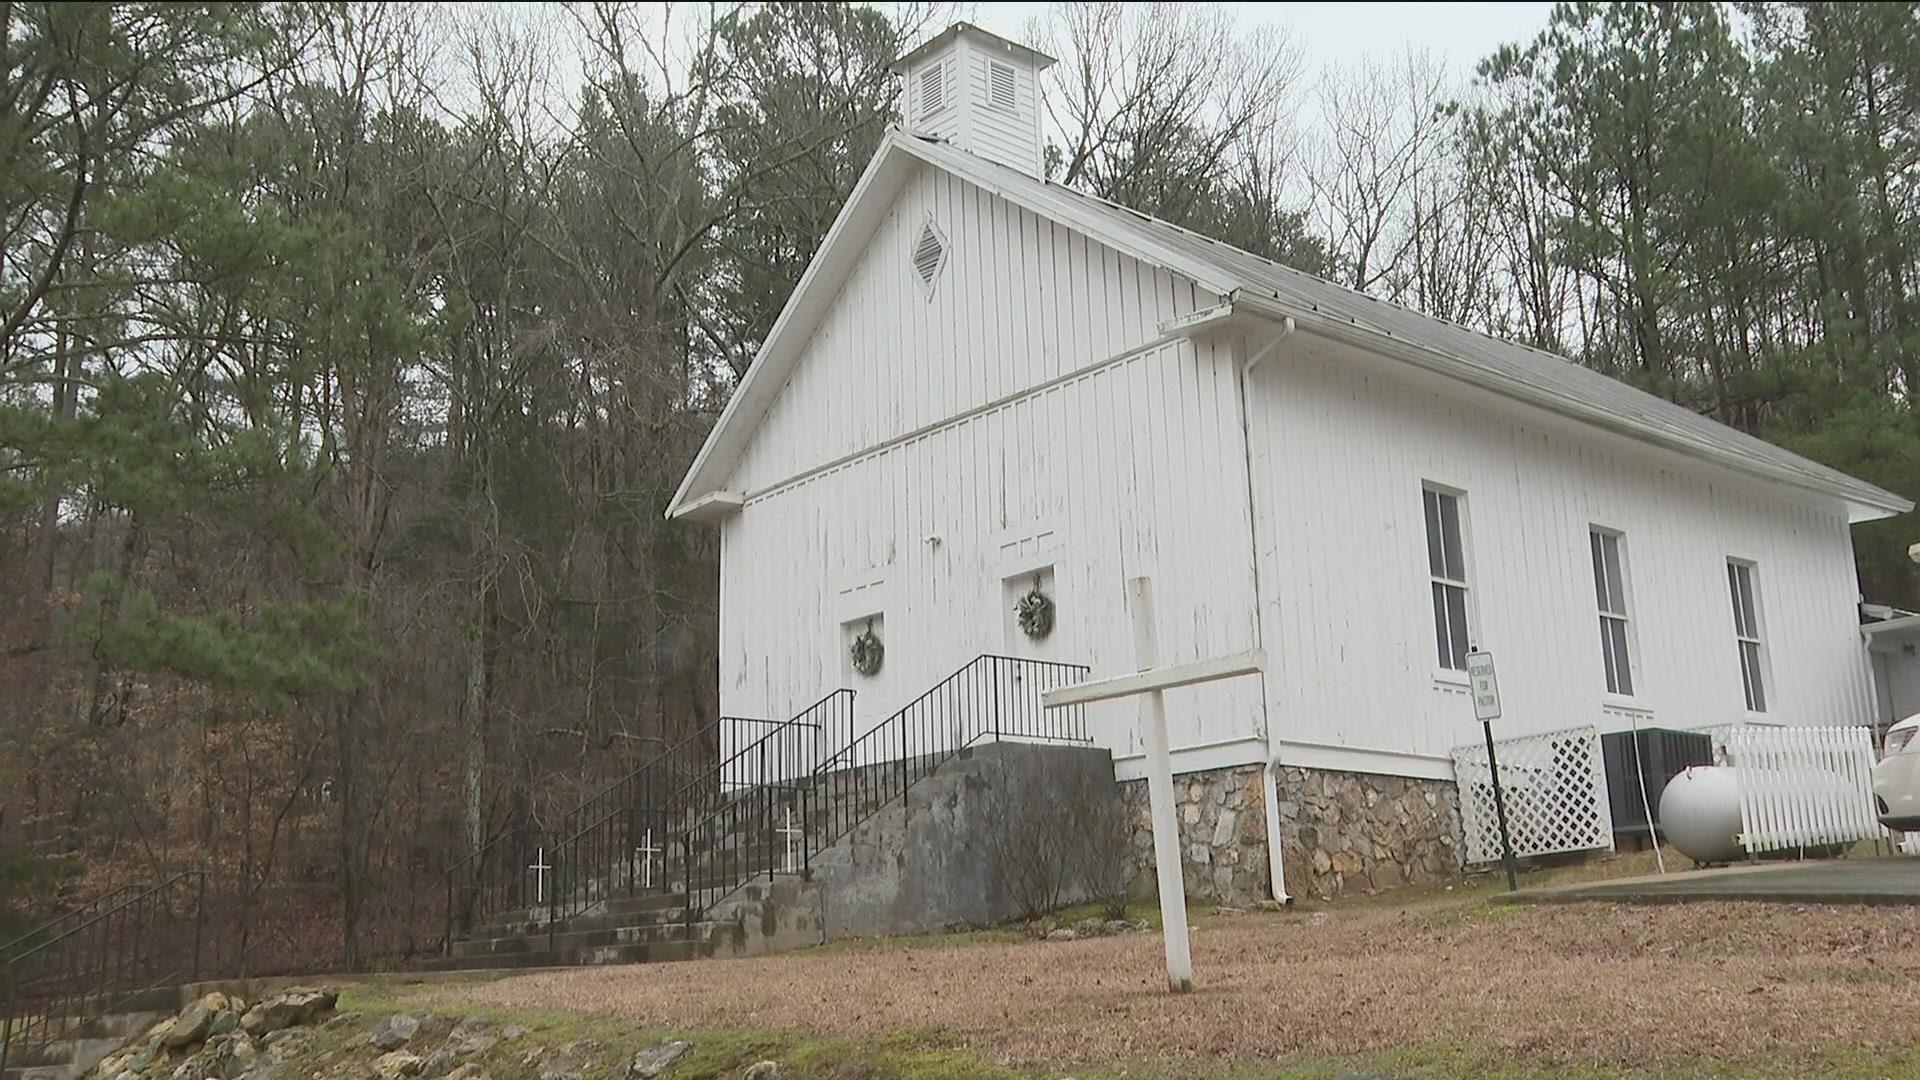 The church is part of the historic community of Chubbtown, established by the Chubbs - a free Black family that settled in Floyd County in the 1860s.